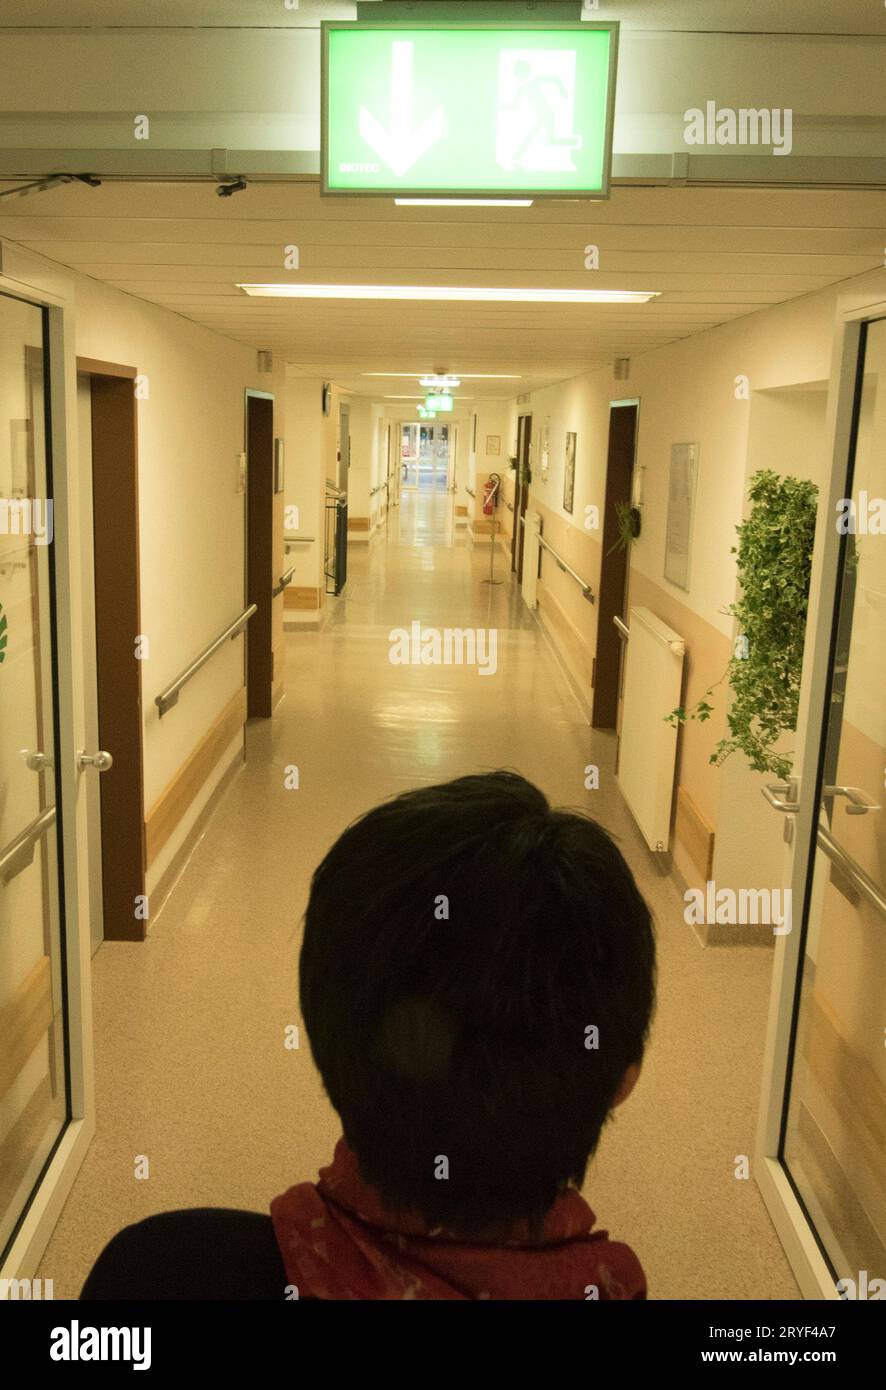 Standing in a hospital hallway Stock Photo